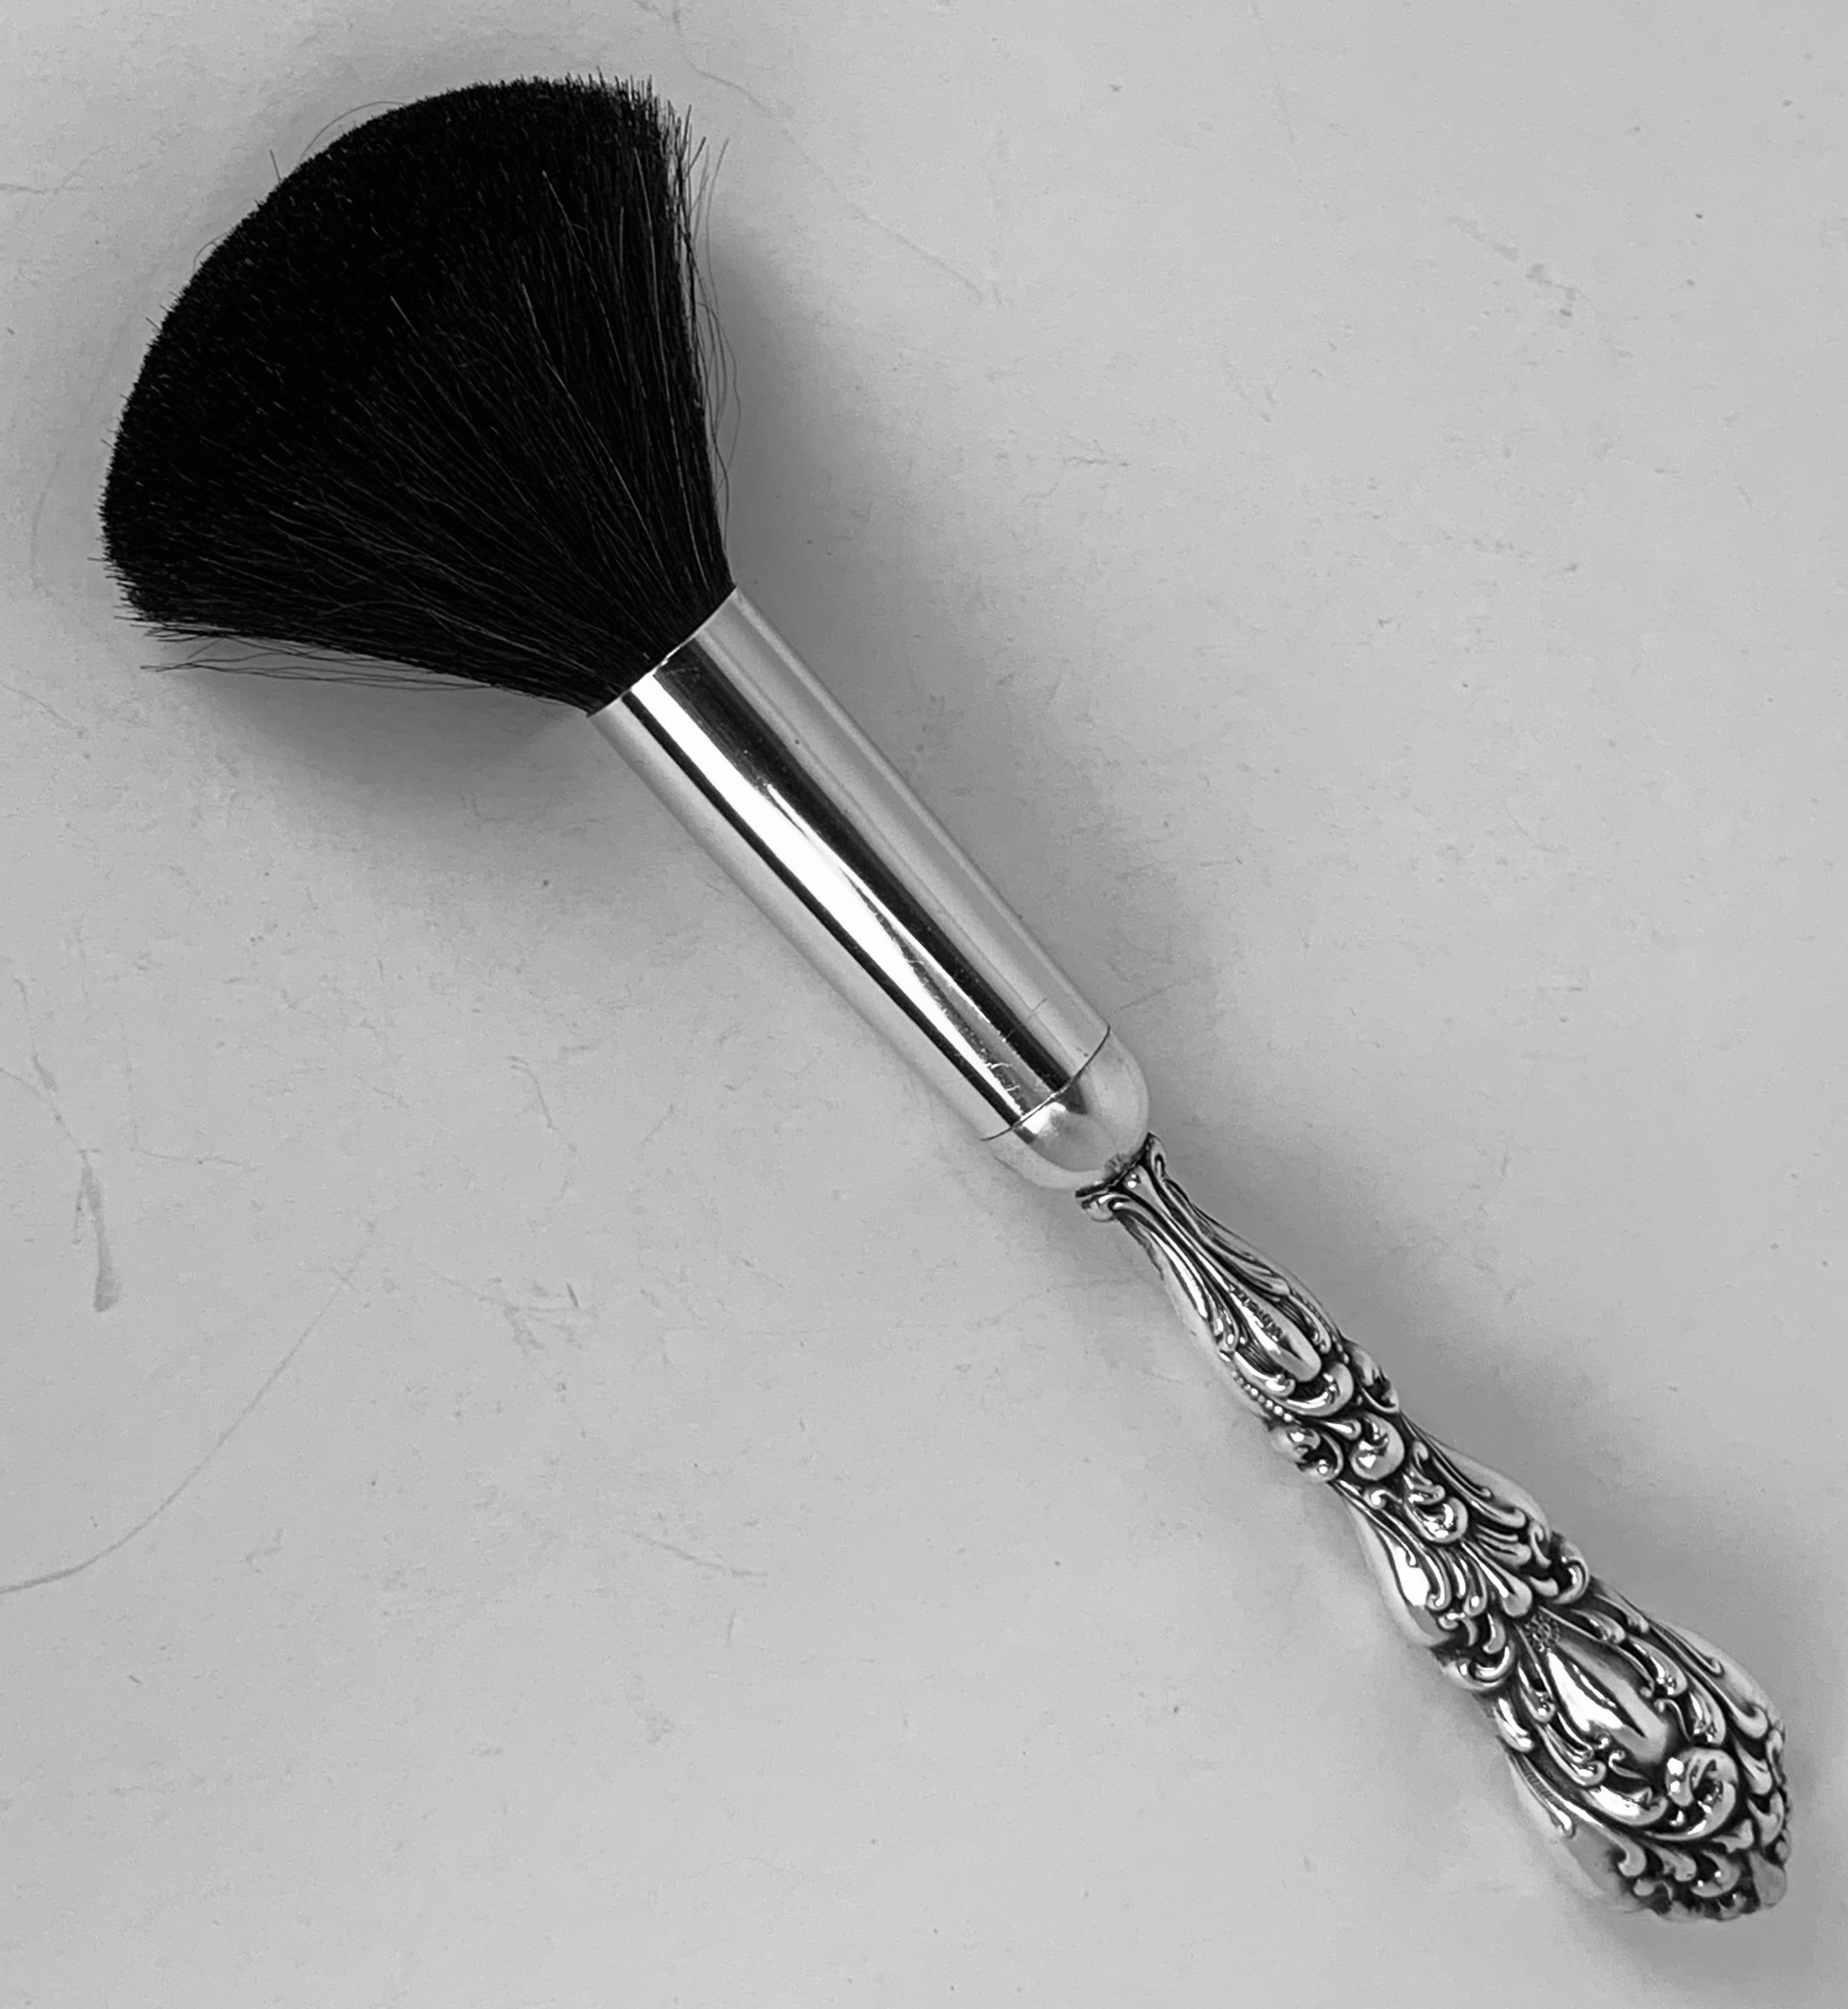 Belle Époque Make-Up Brush with a Sterling Silver Repoussé Hande,  American, 19th c. 